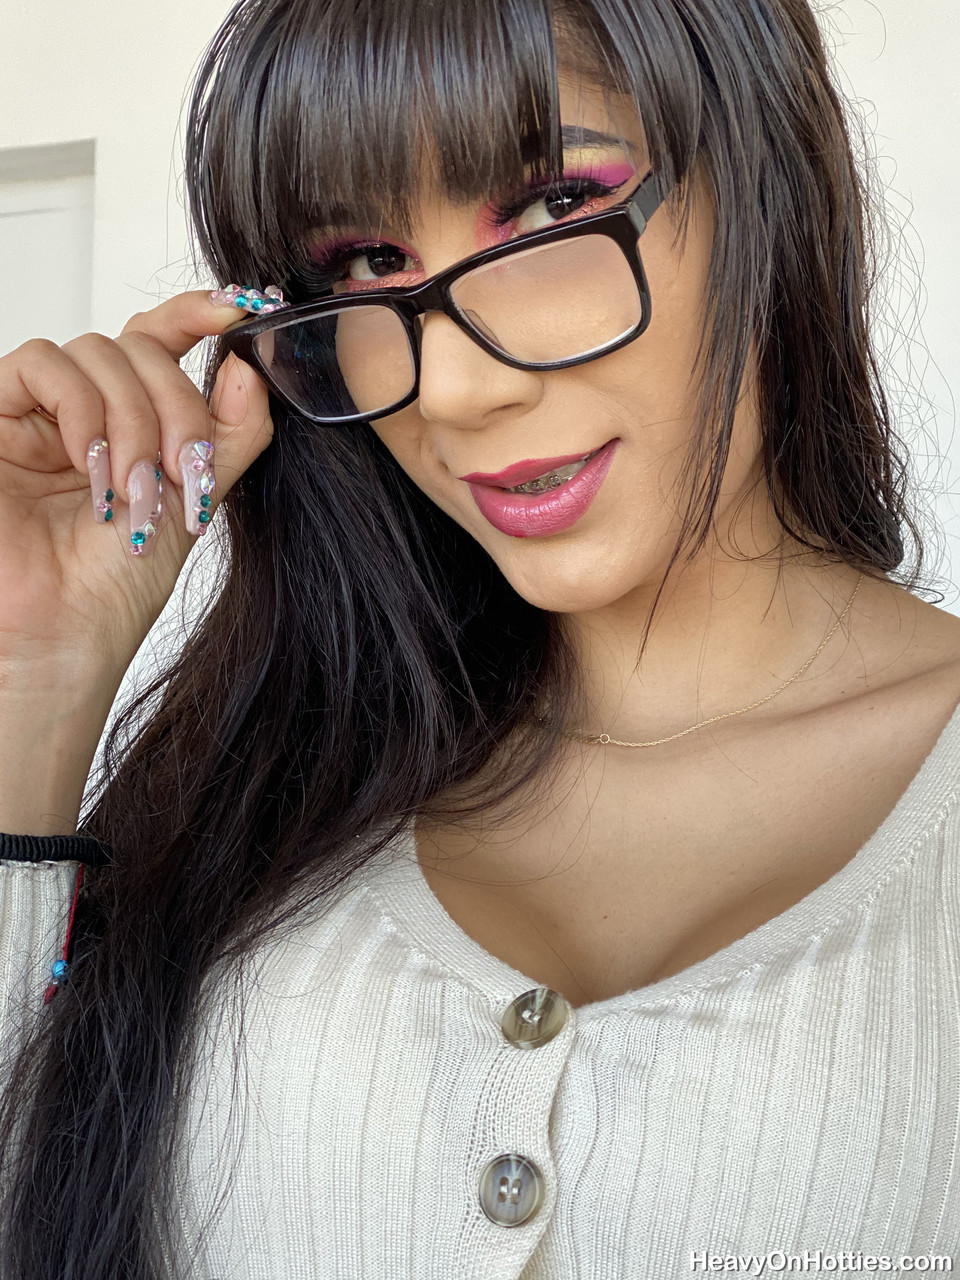 Sexy brunette Mia Marin strips to her shoes and glasses before POV action porn photo #424700857 | Heavy On Hotties Pics, Mia Marin, POV, mobile porn